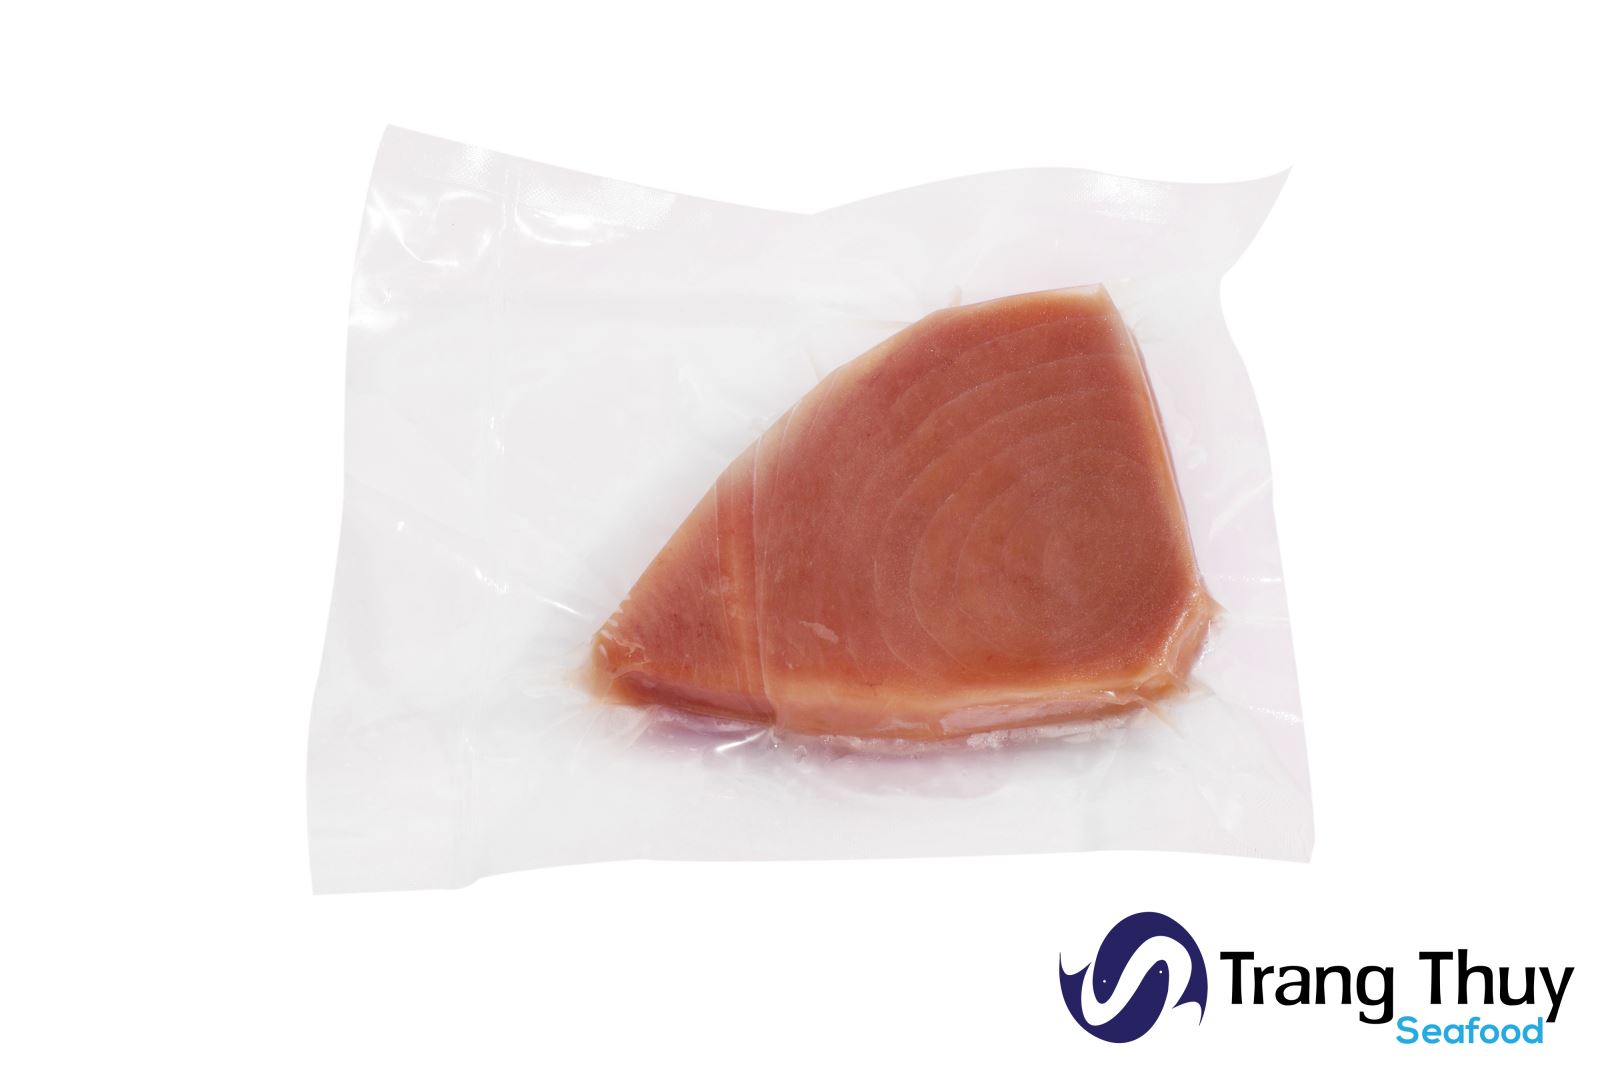 Untreated Frozen Yellowfin Tuna Steak Produced By Trang Thuy Seafood